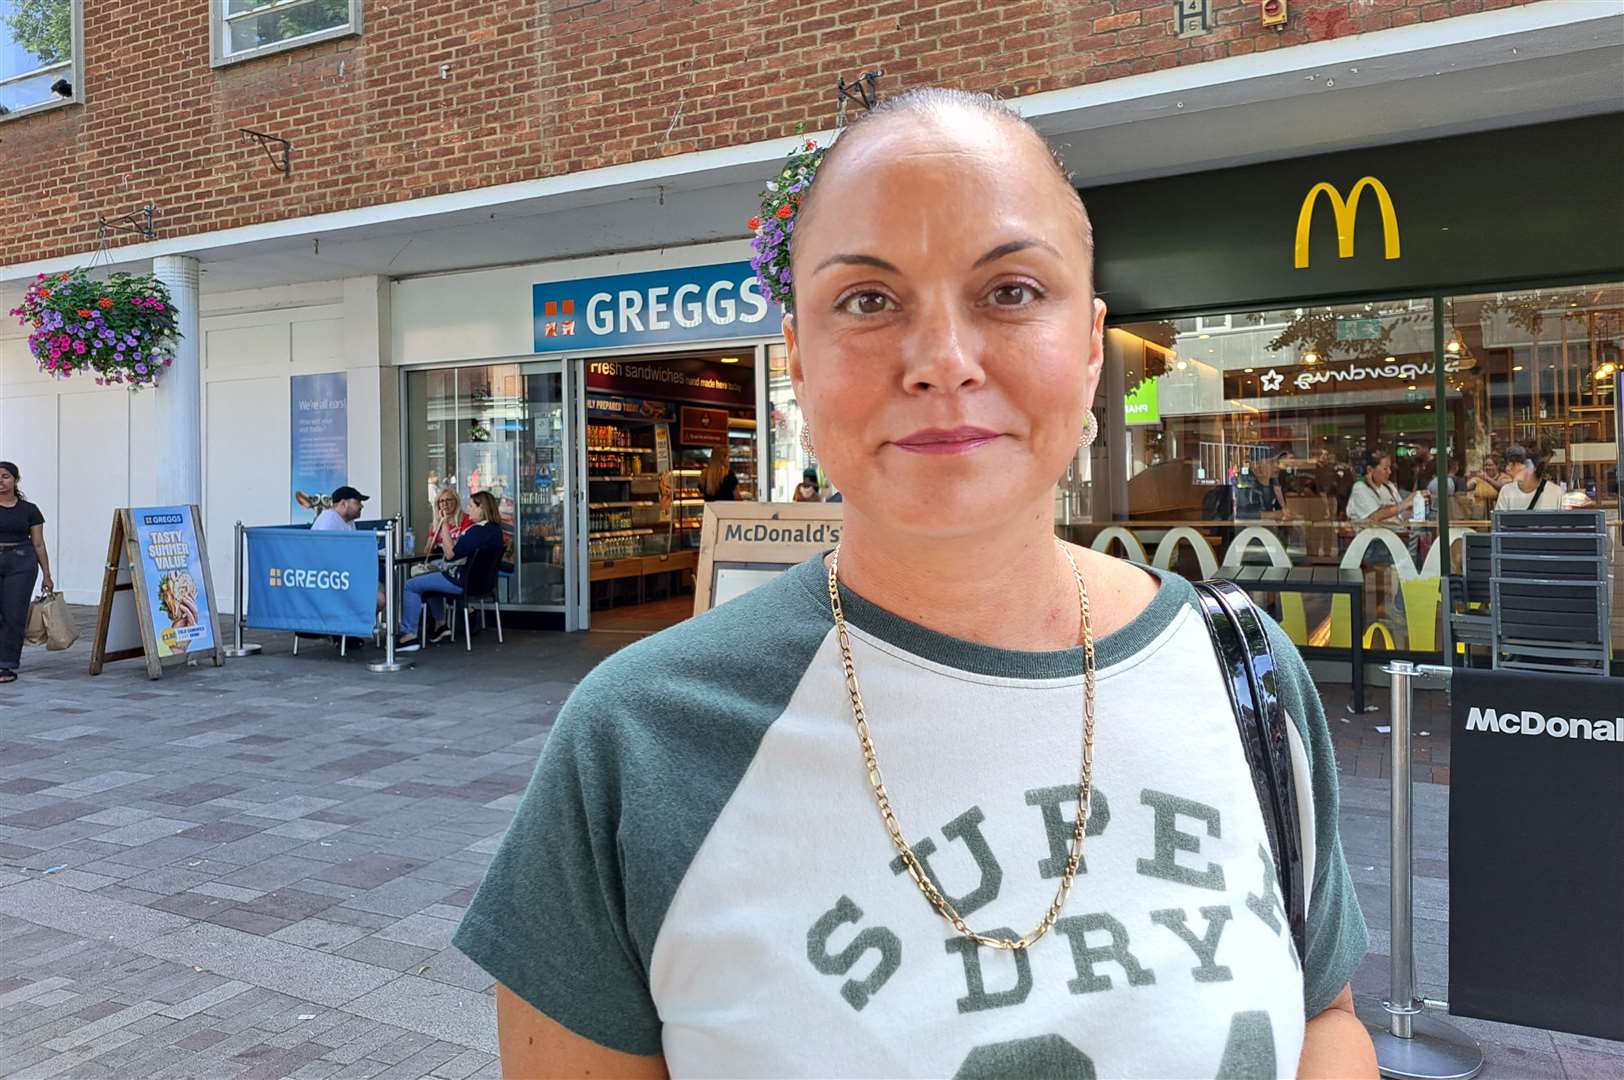 Amanda Skinner, 44, would like to see more Canterbury businesses open later